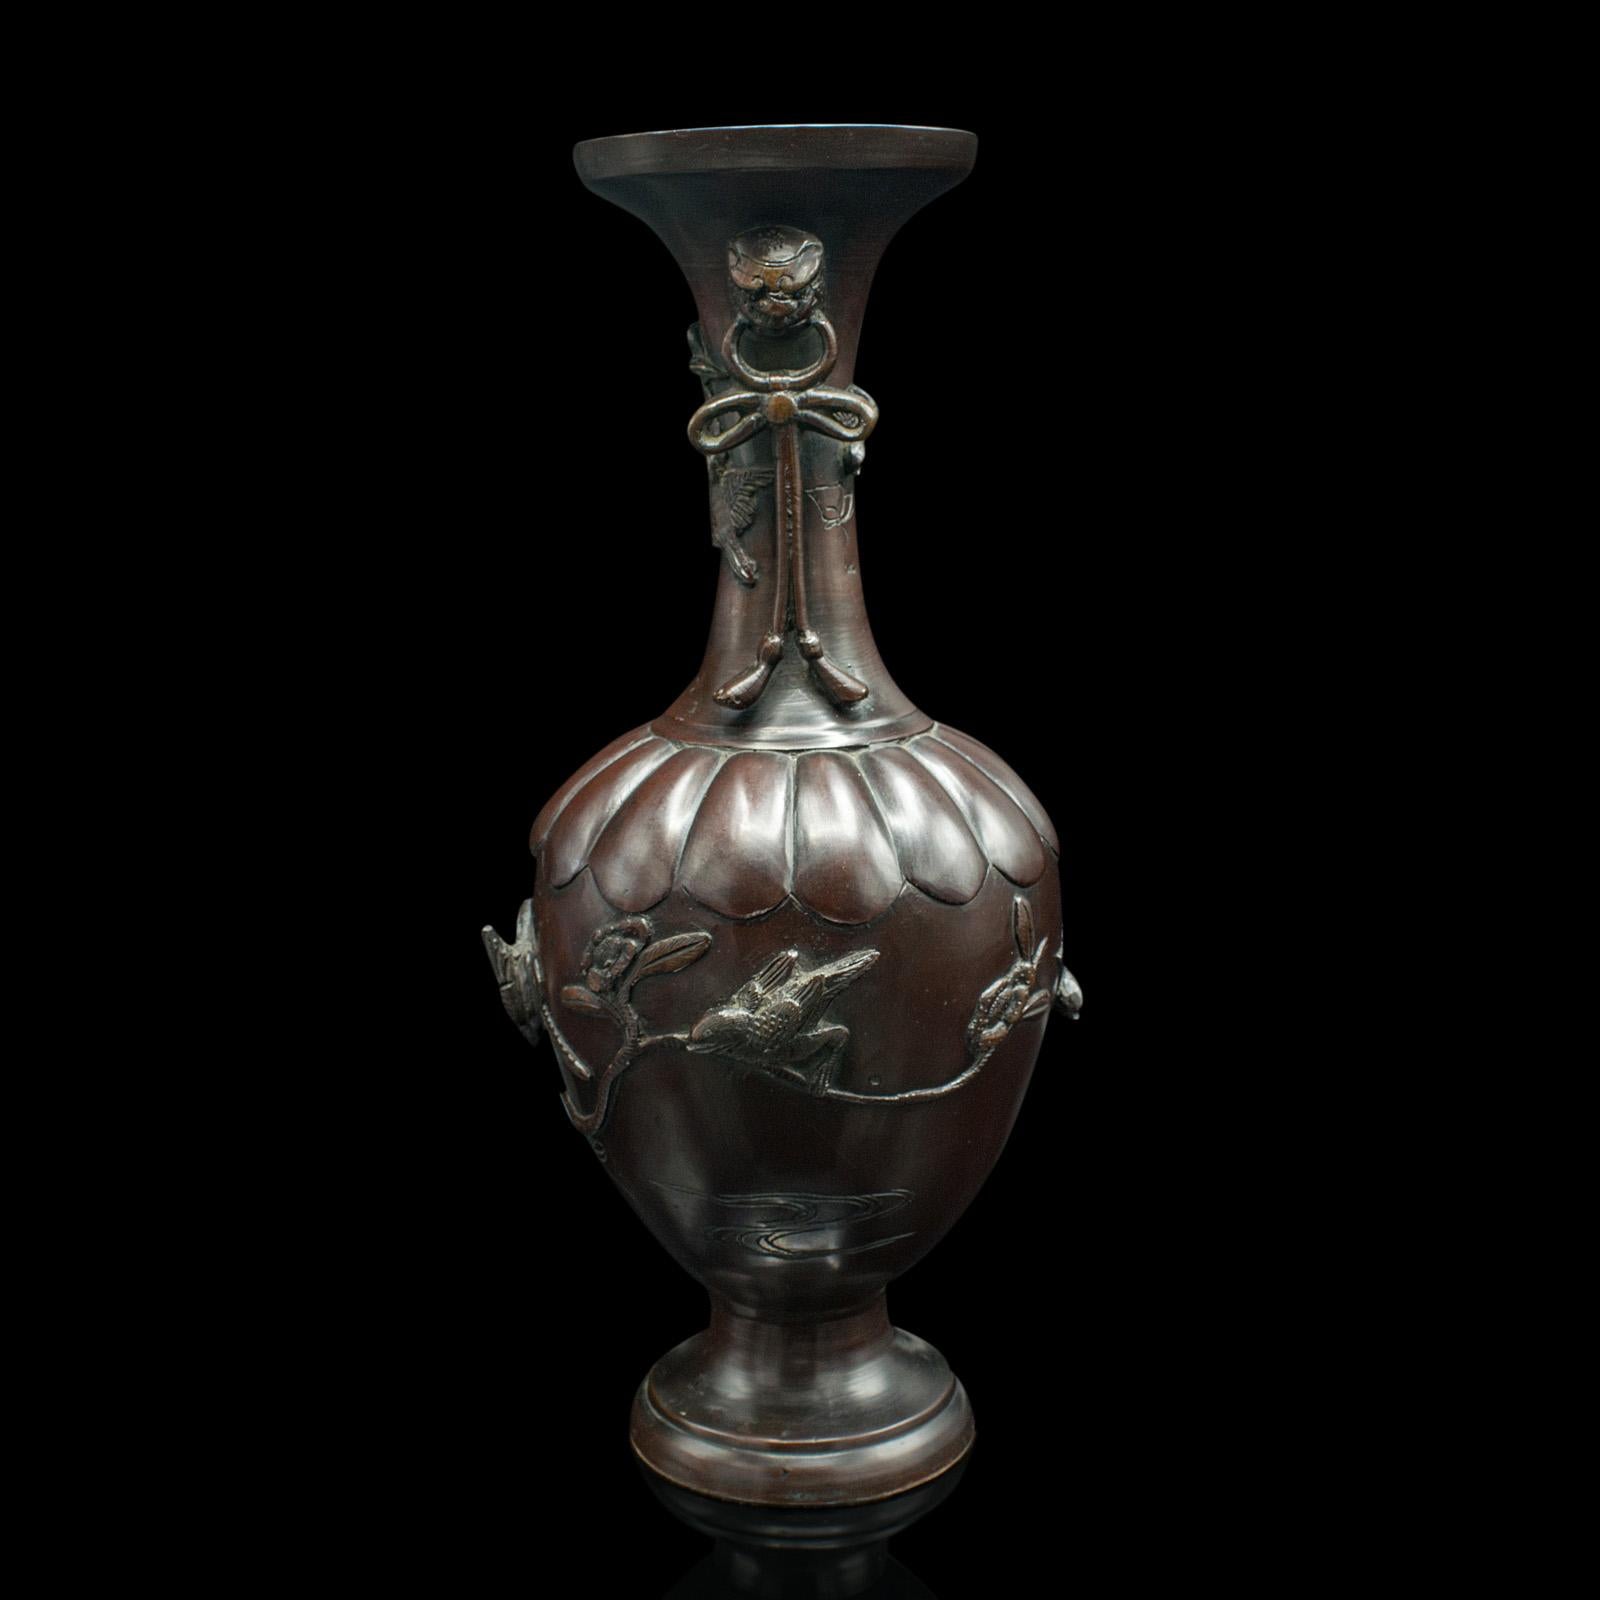 This is an antique decorative stem vase. A Japanese, bronze Meiji era baluster urn, dating to the late Victorian period, circa 1880.

Traditional baluster form with superb relief bird detail
Displaying a desirable aged patina with minimal